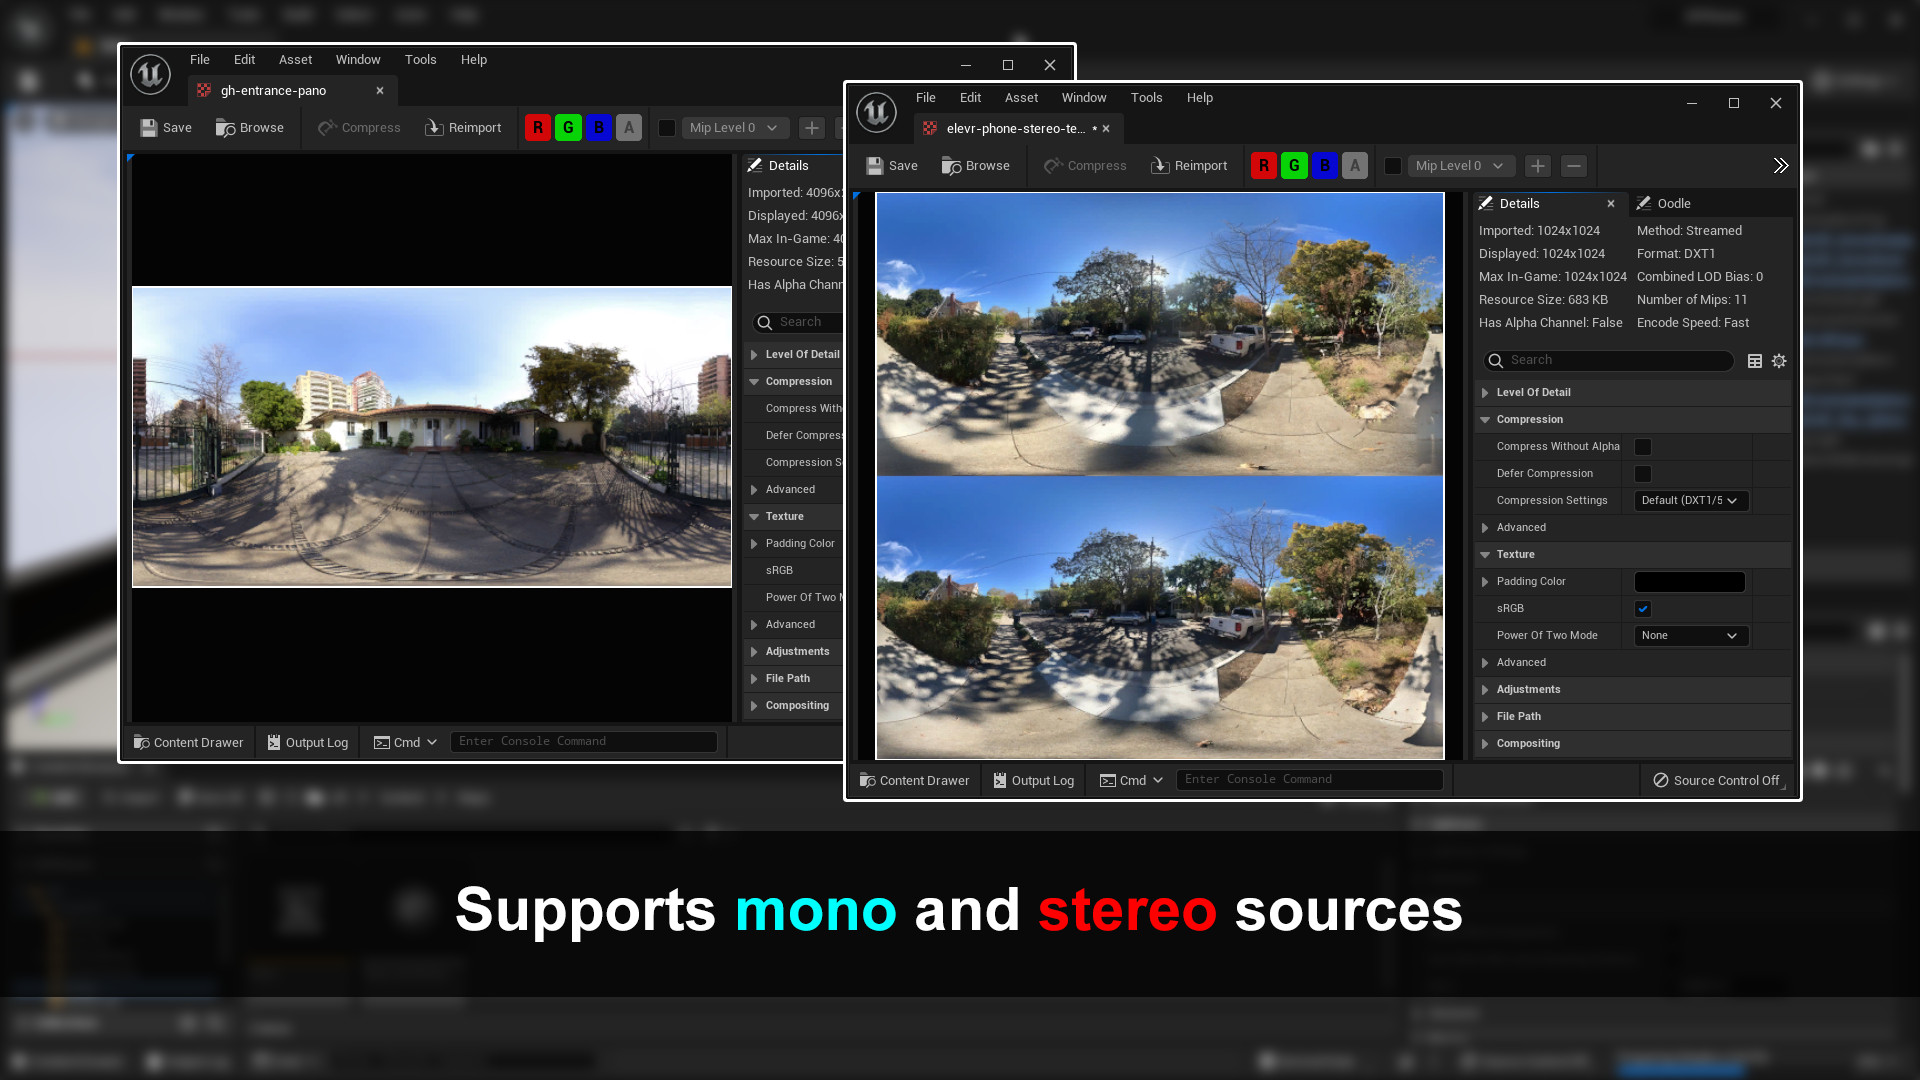 Supported mono and stero 360 images and 360 videos